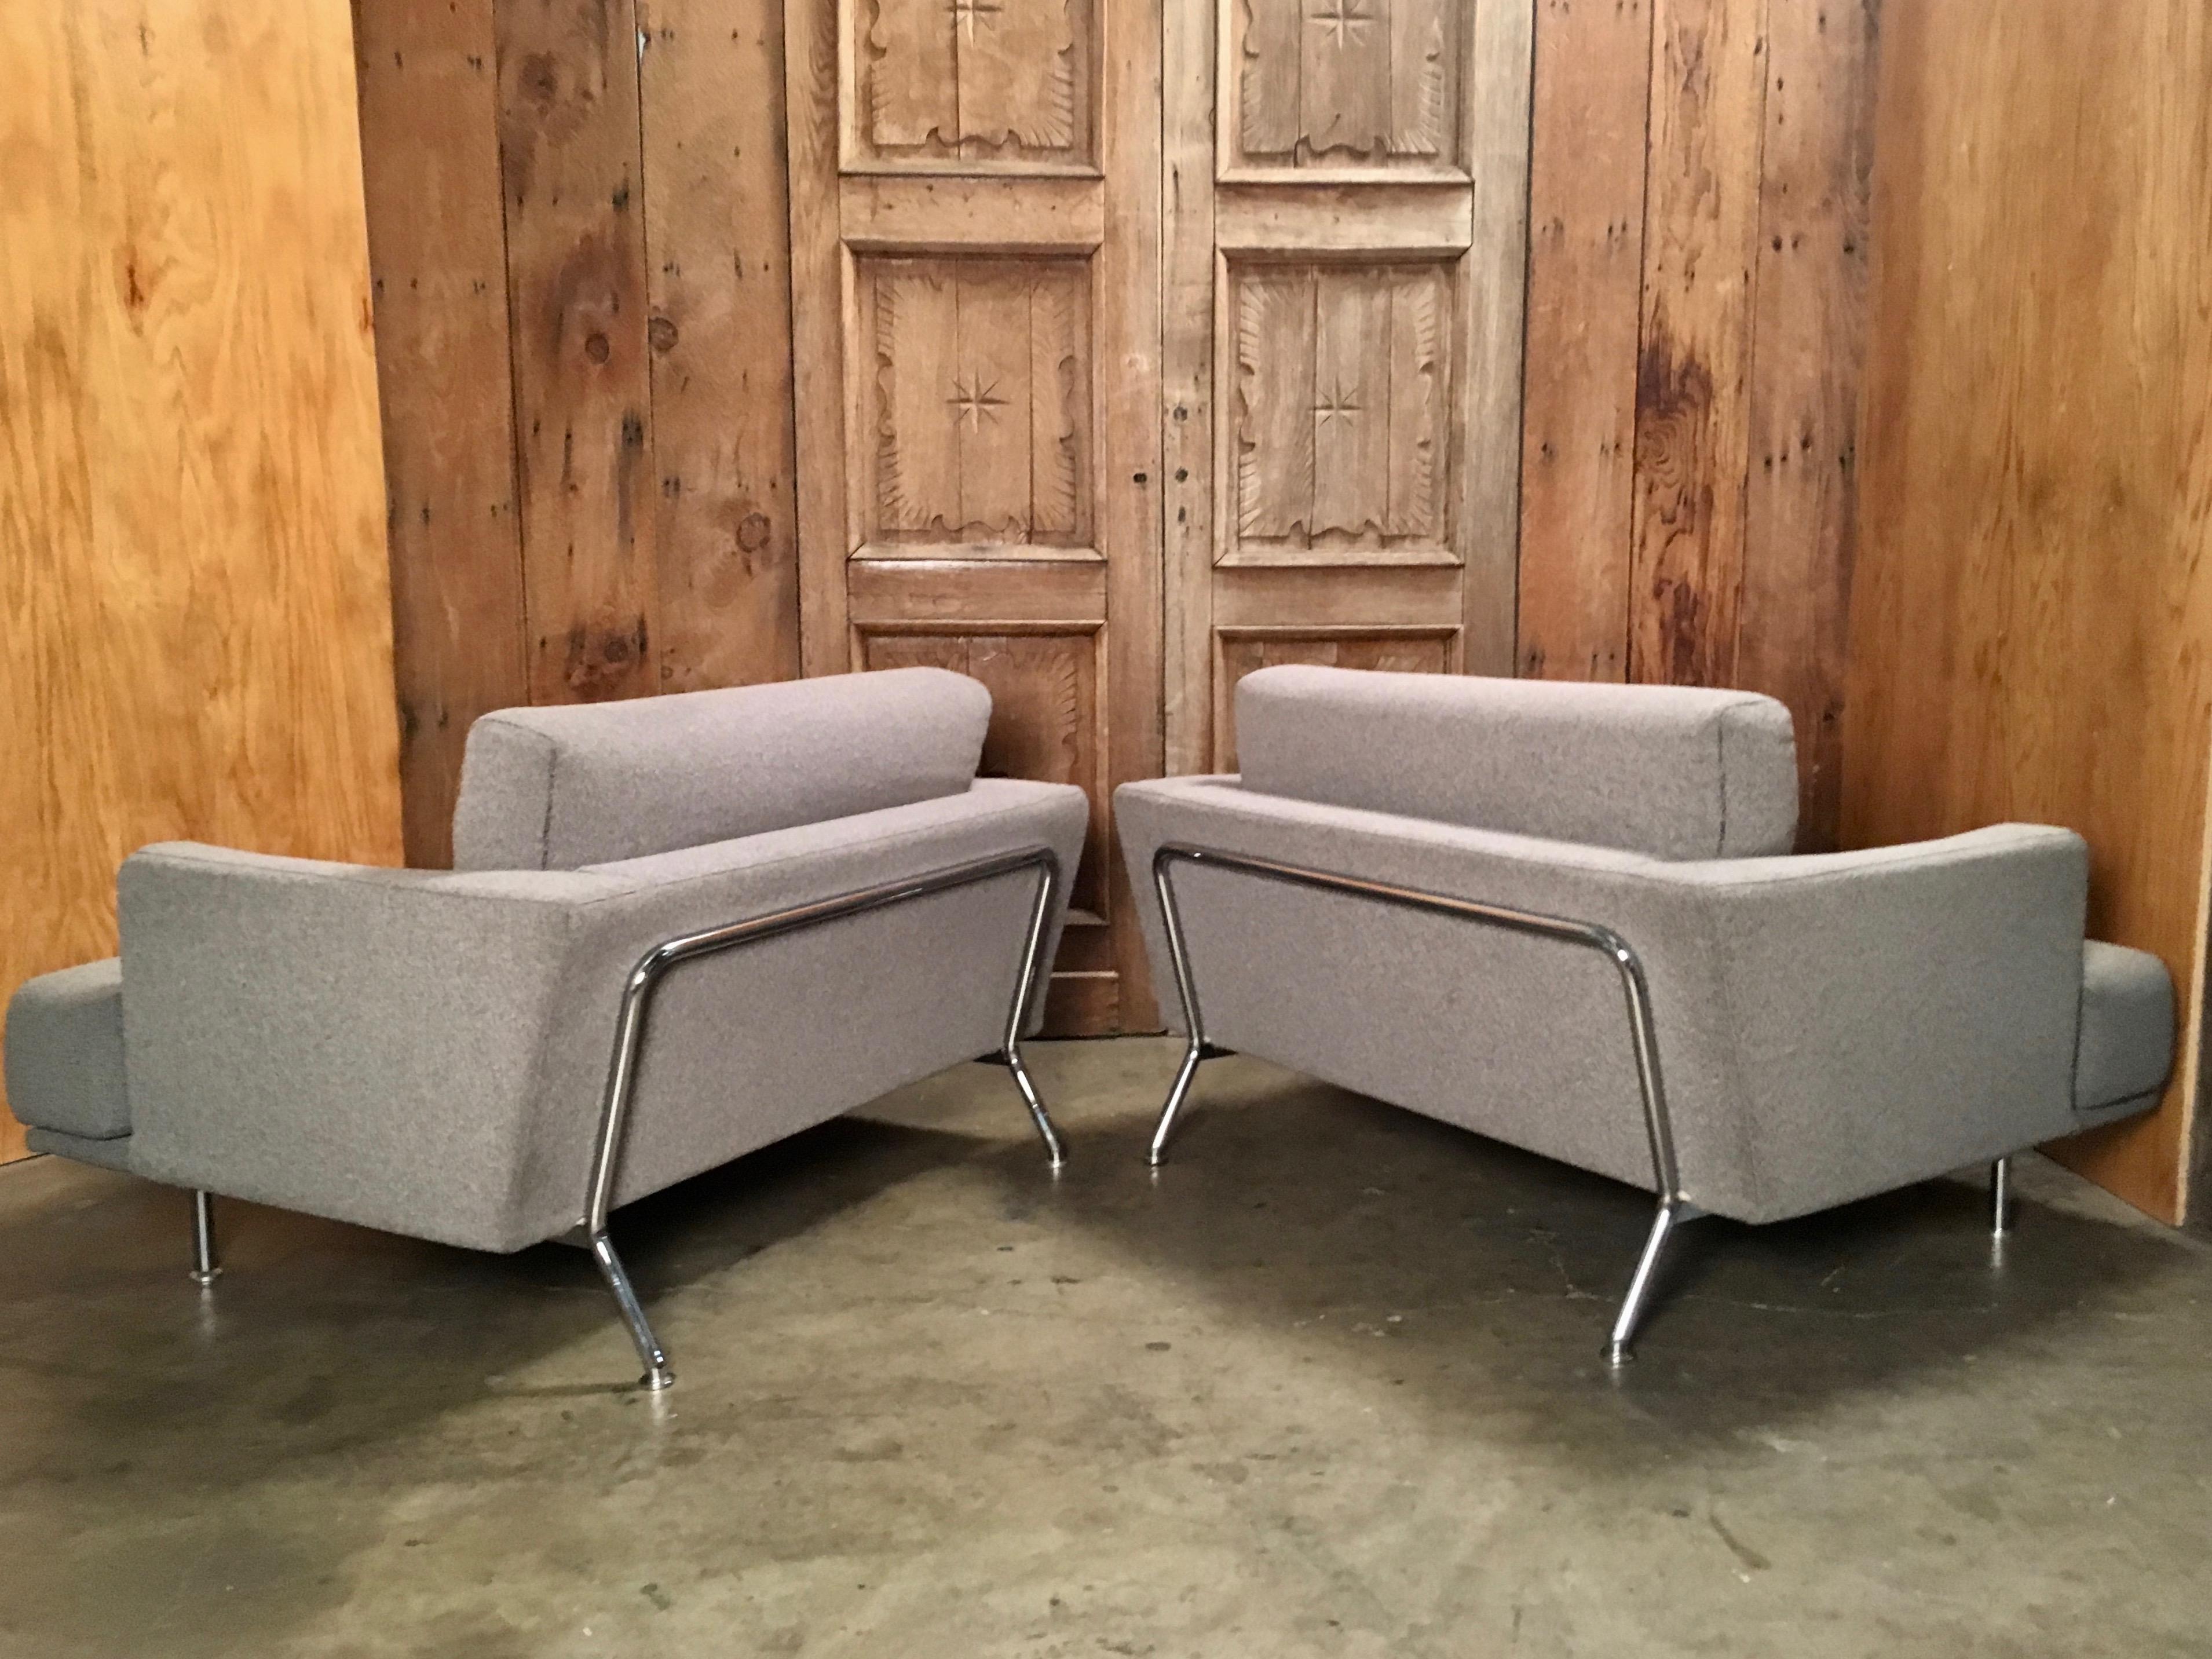 Upholstery Cassina “253 Nest” Chairs in Grey Wool by Piero Lissoni